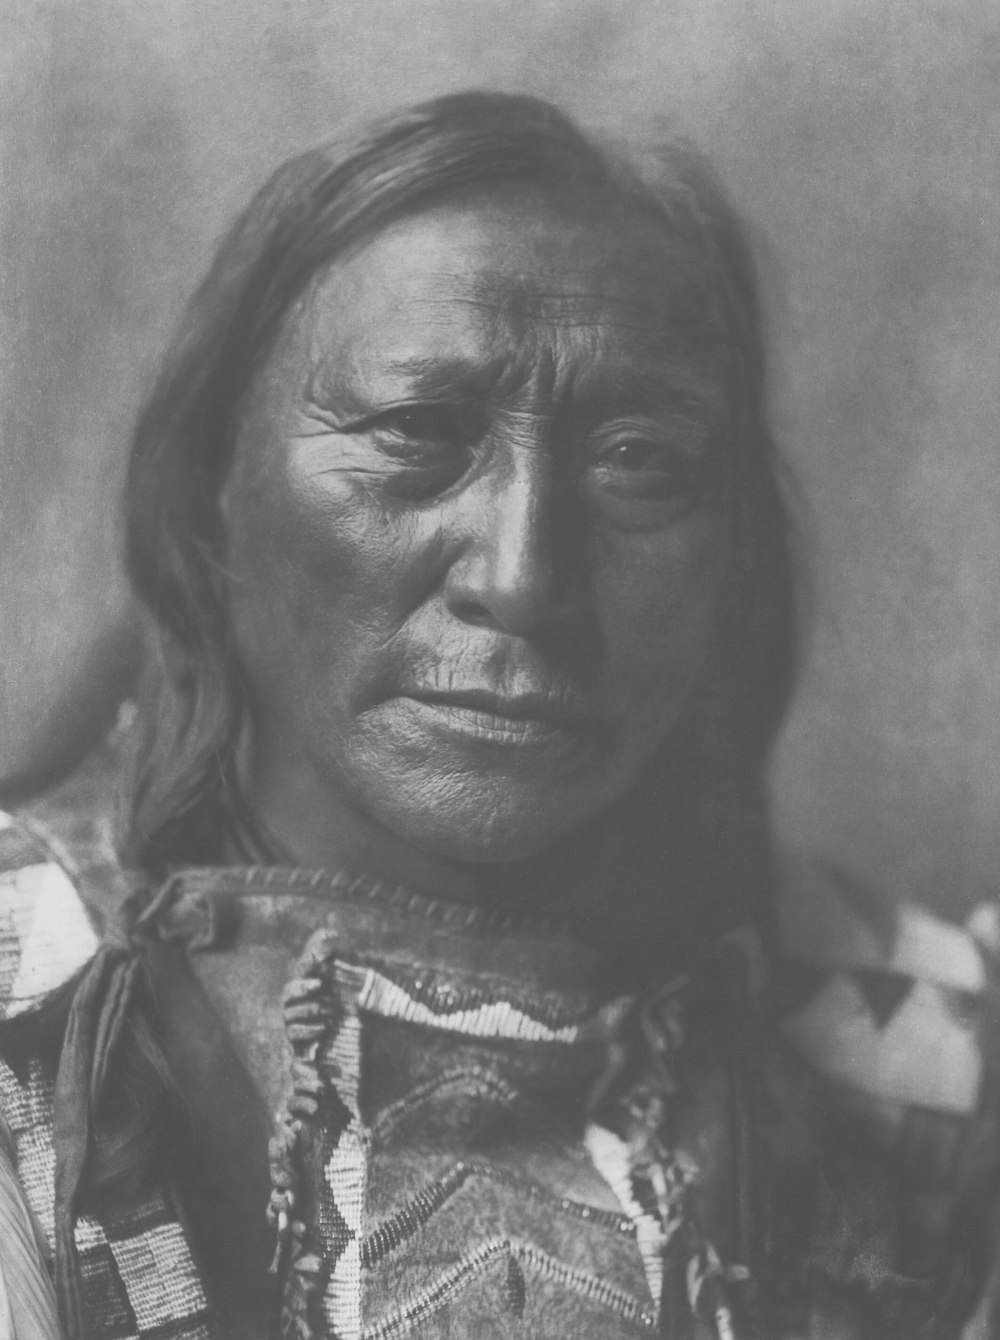 a black and white photo of a native american woman